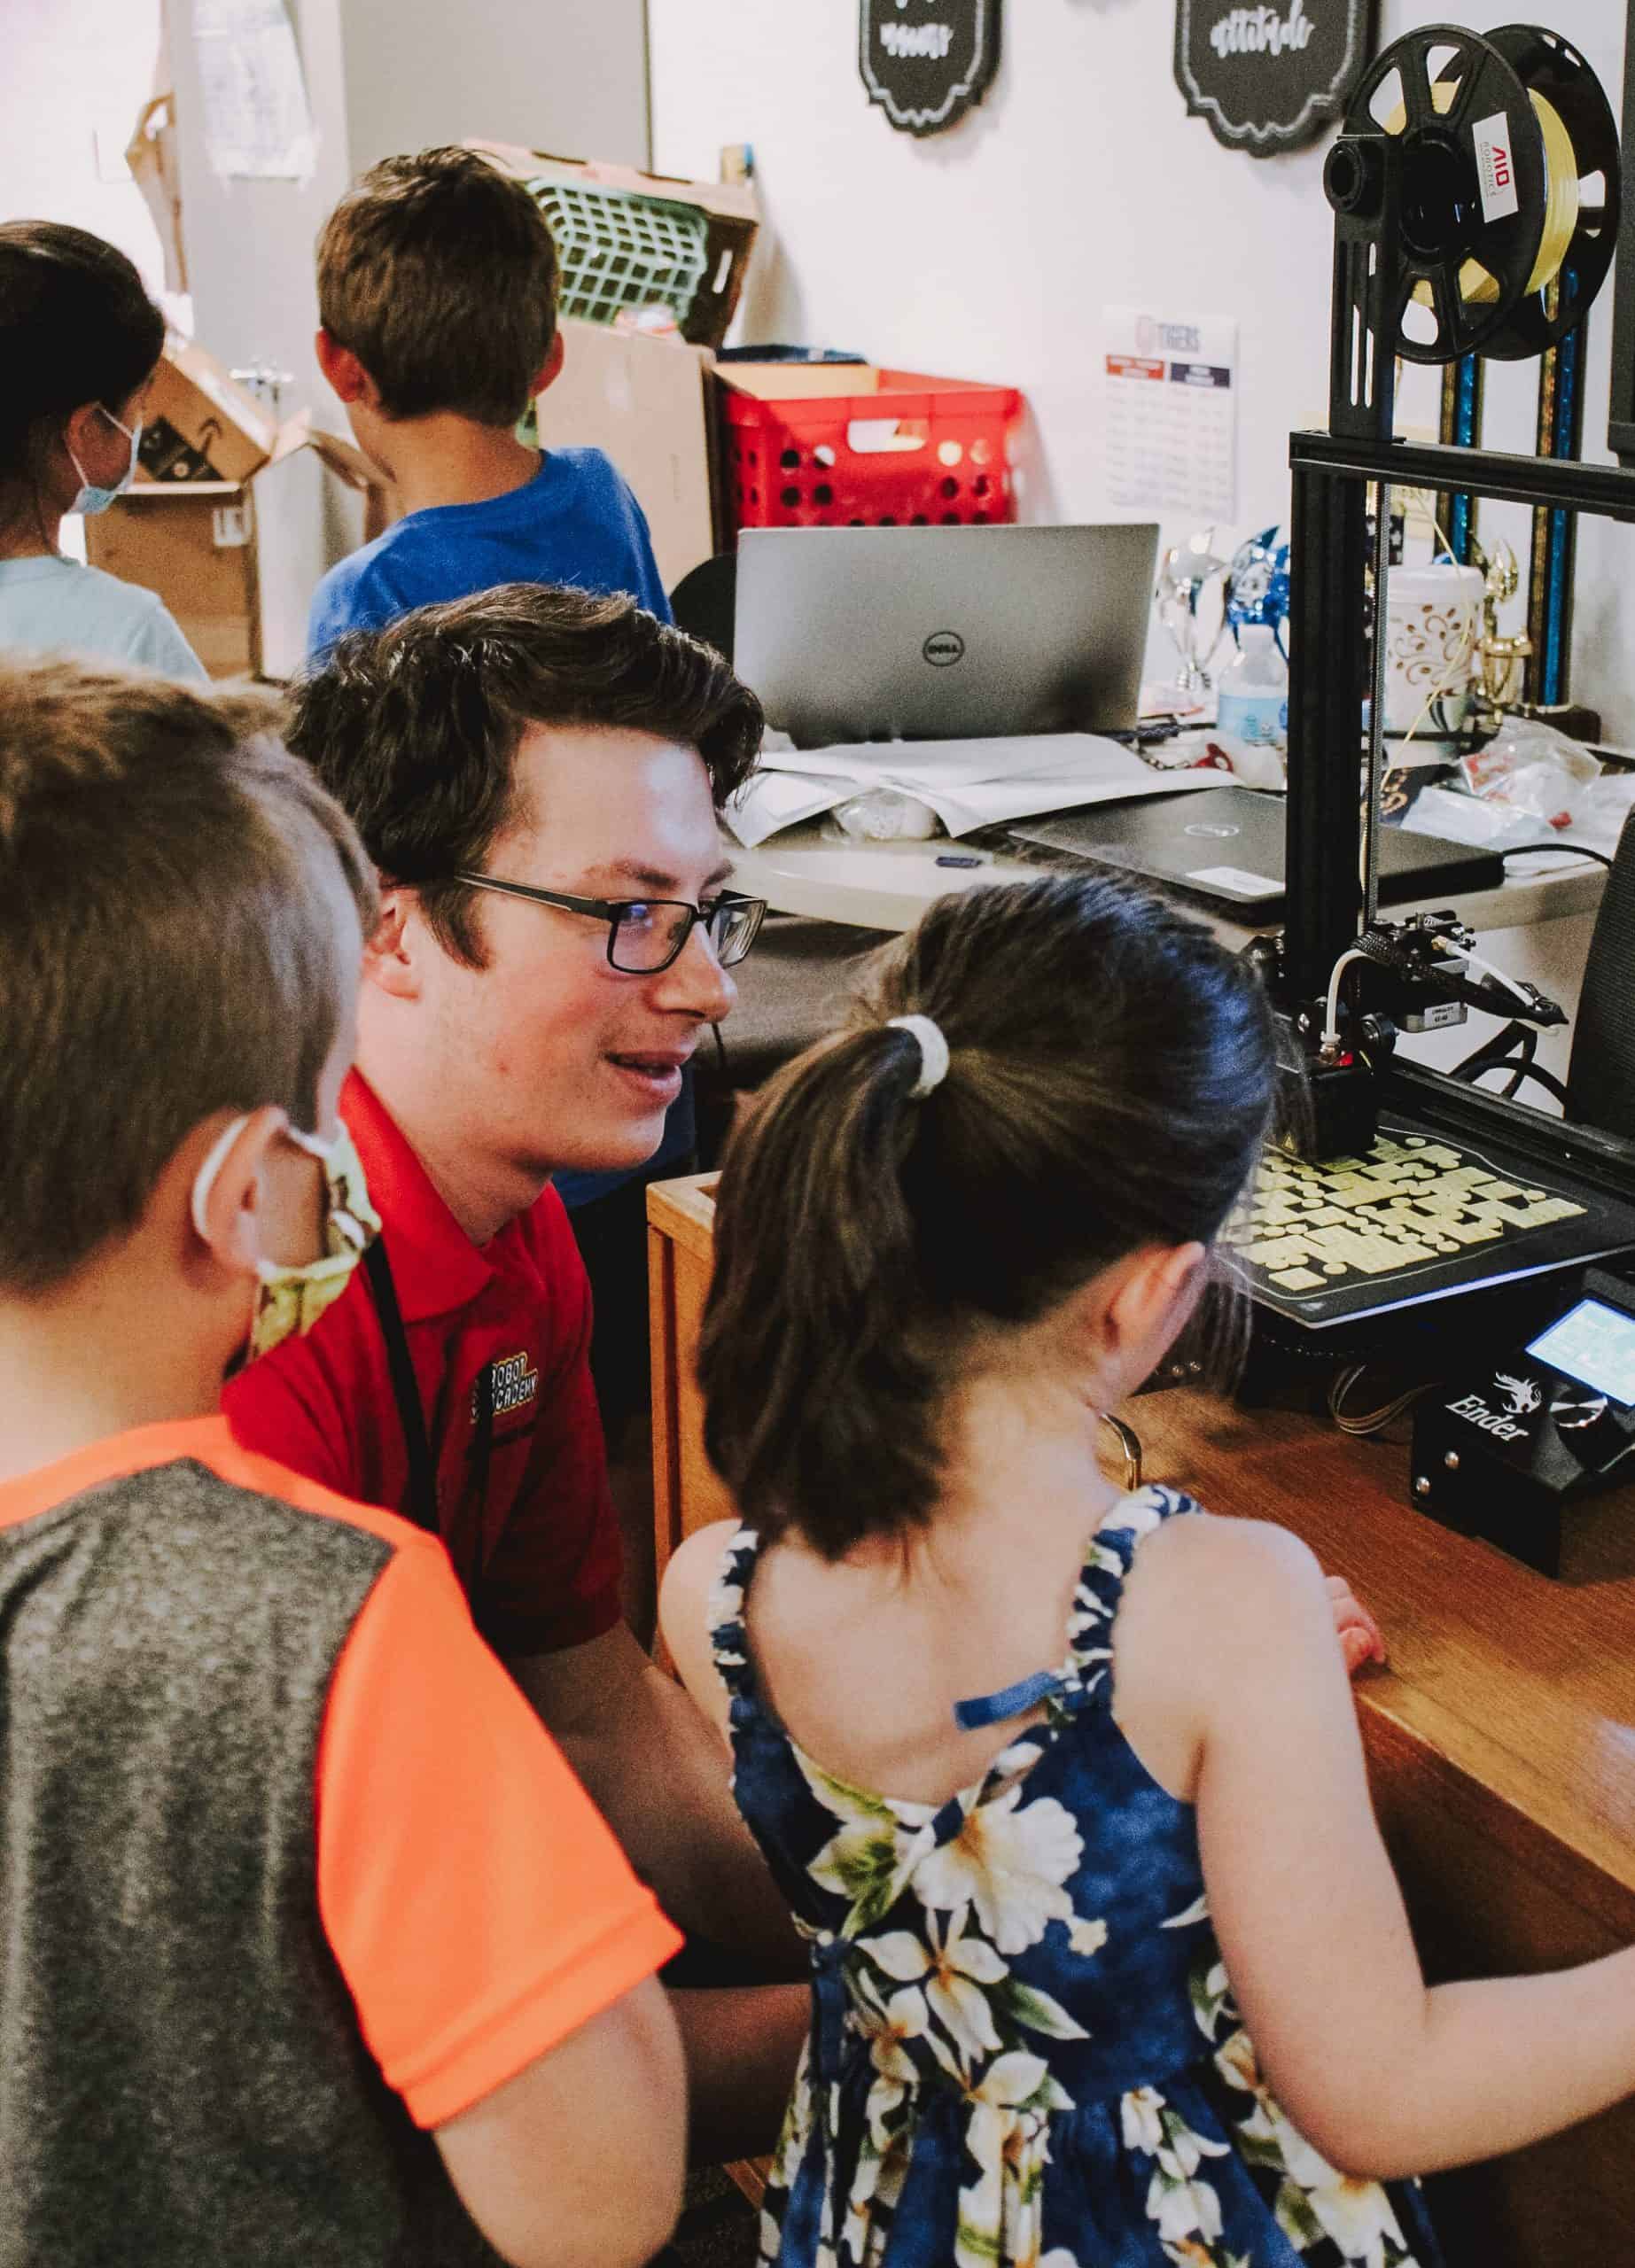 You are currently viewing Sr. LEGO® Robotics & 3D Printing Camp for ages 8 to 13 | Morning | 5 Days: June 19-23, 2023 | 9:30 am to 12:30 pm | Reynoldsburg